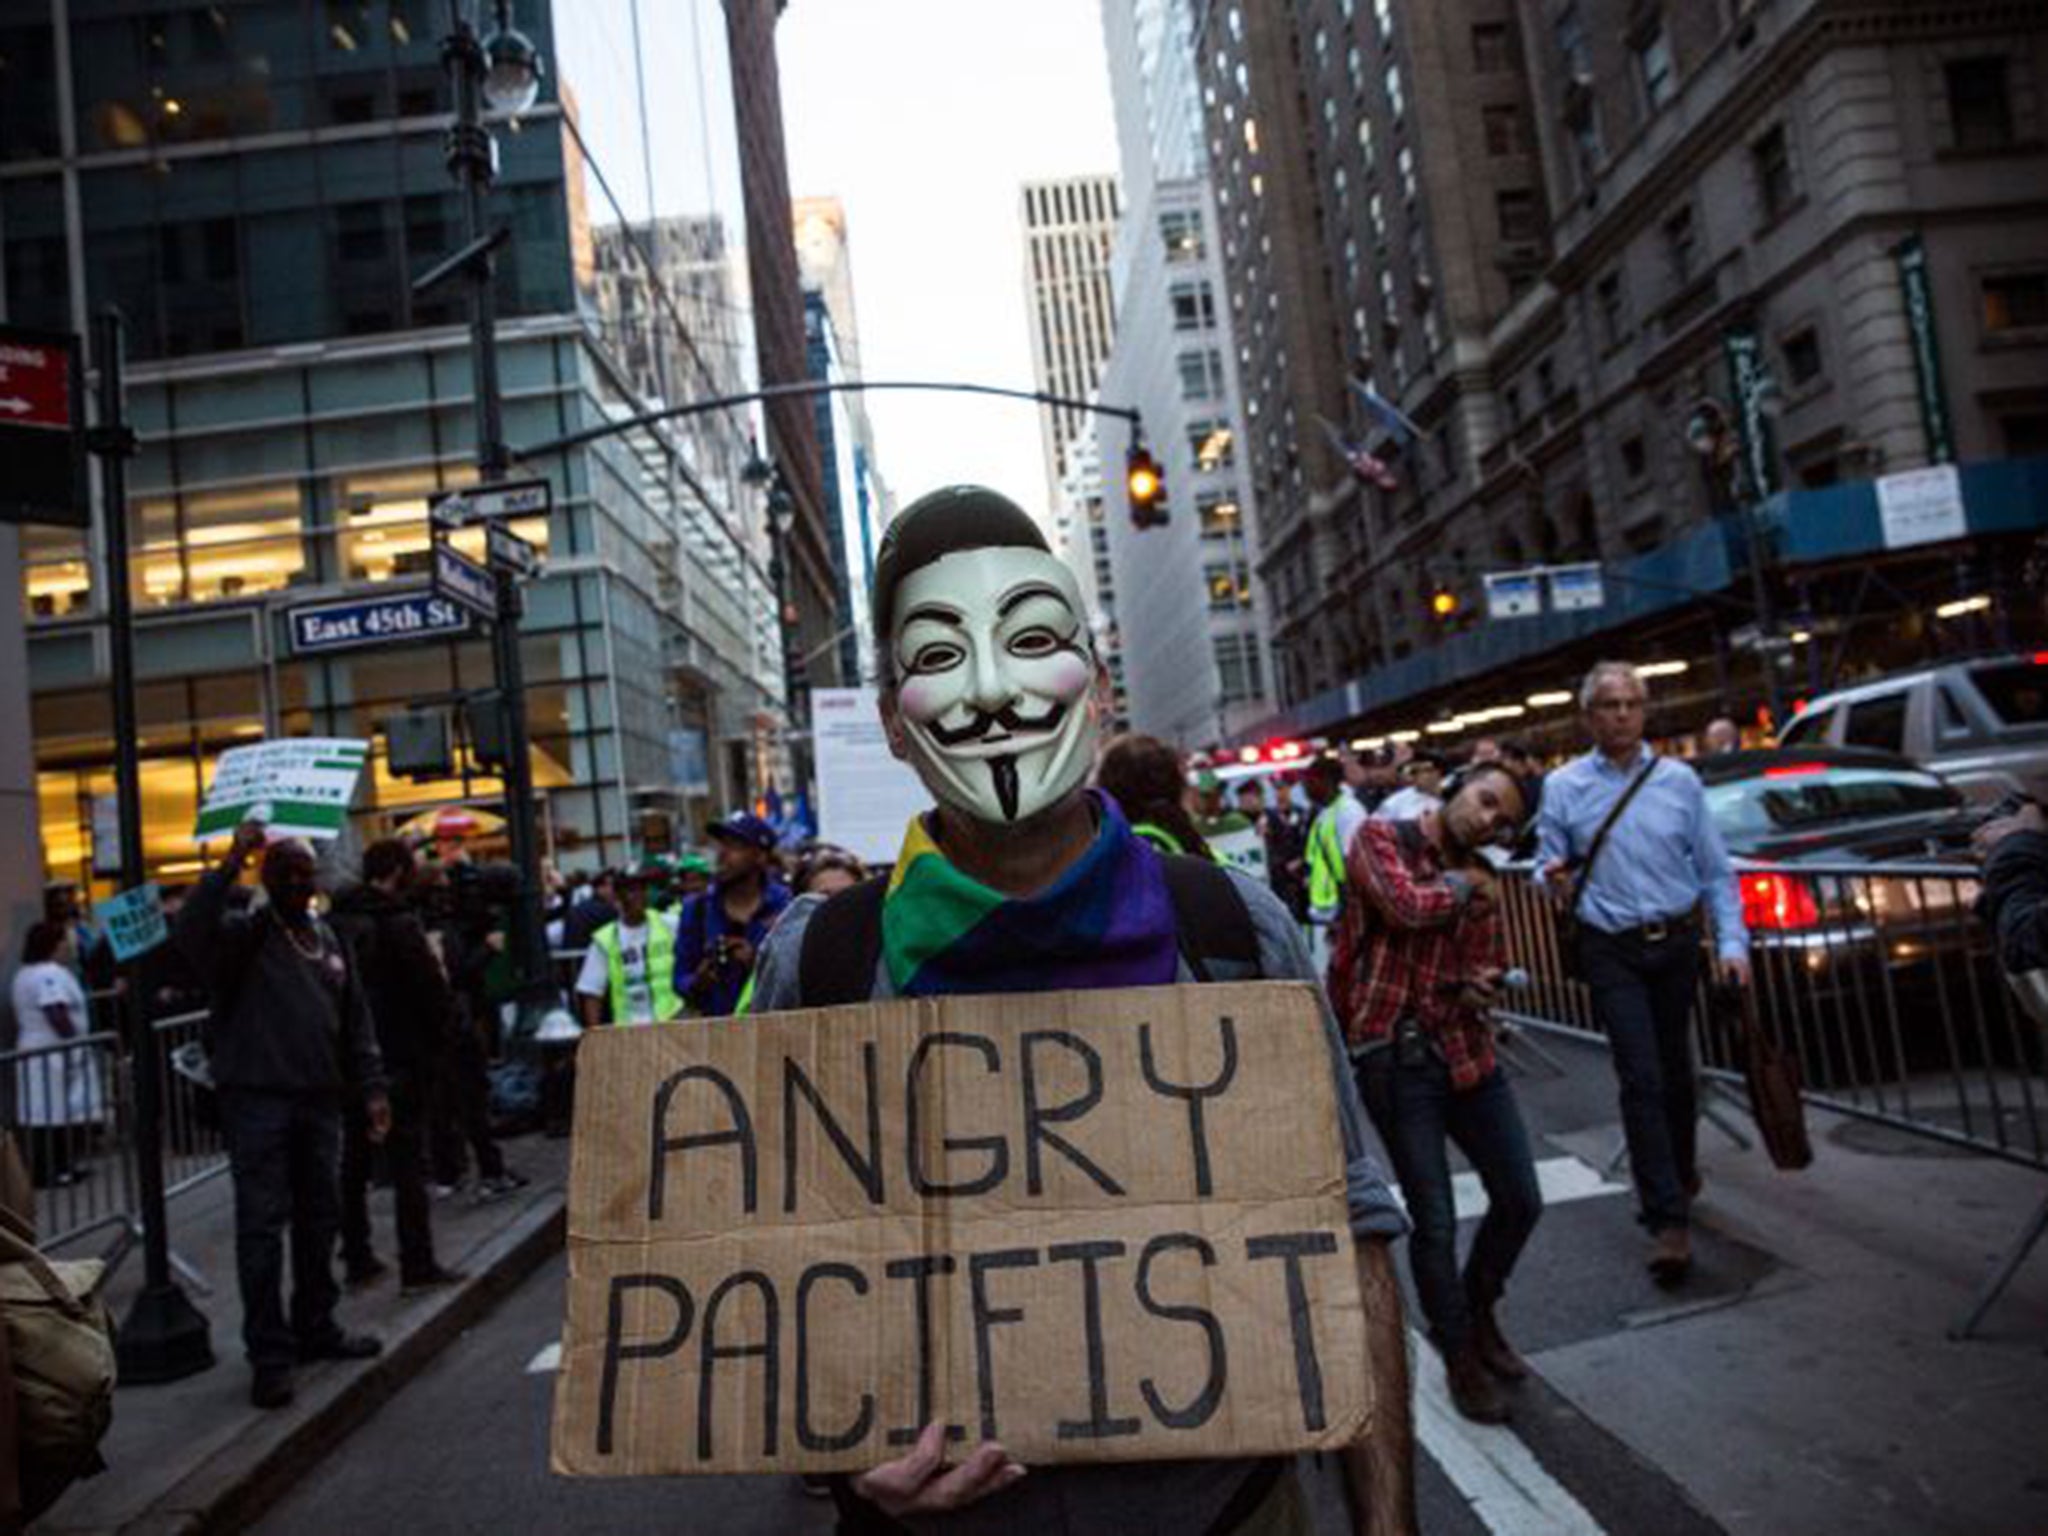 The Occupy Wall Street protest in 2013